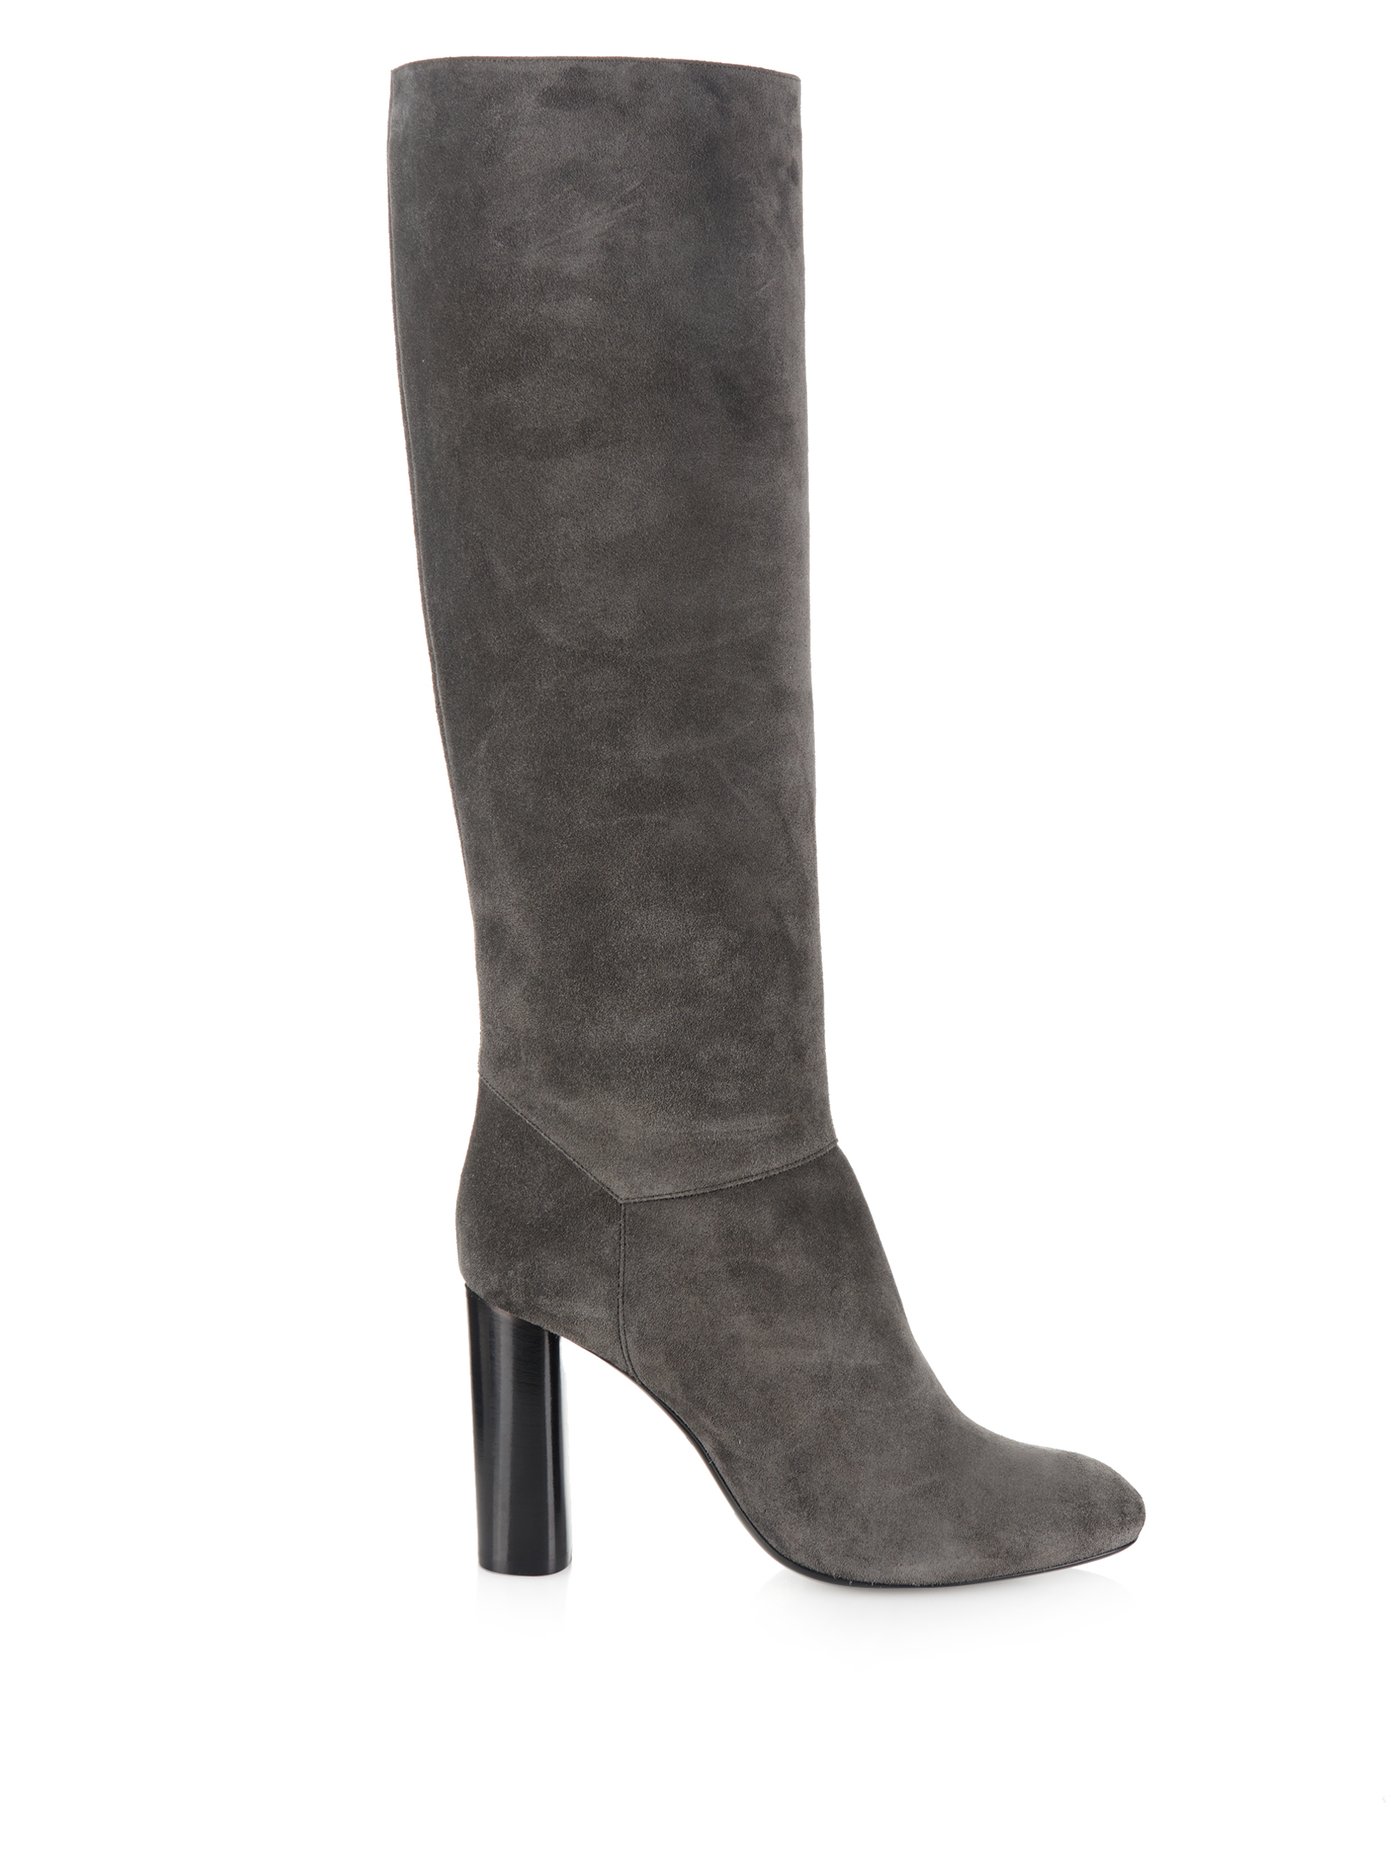 Suede knee-high boots | Lanvin 